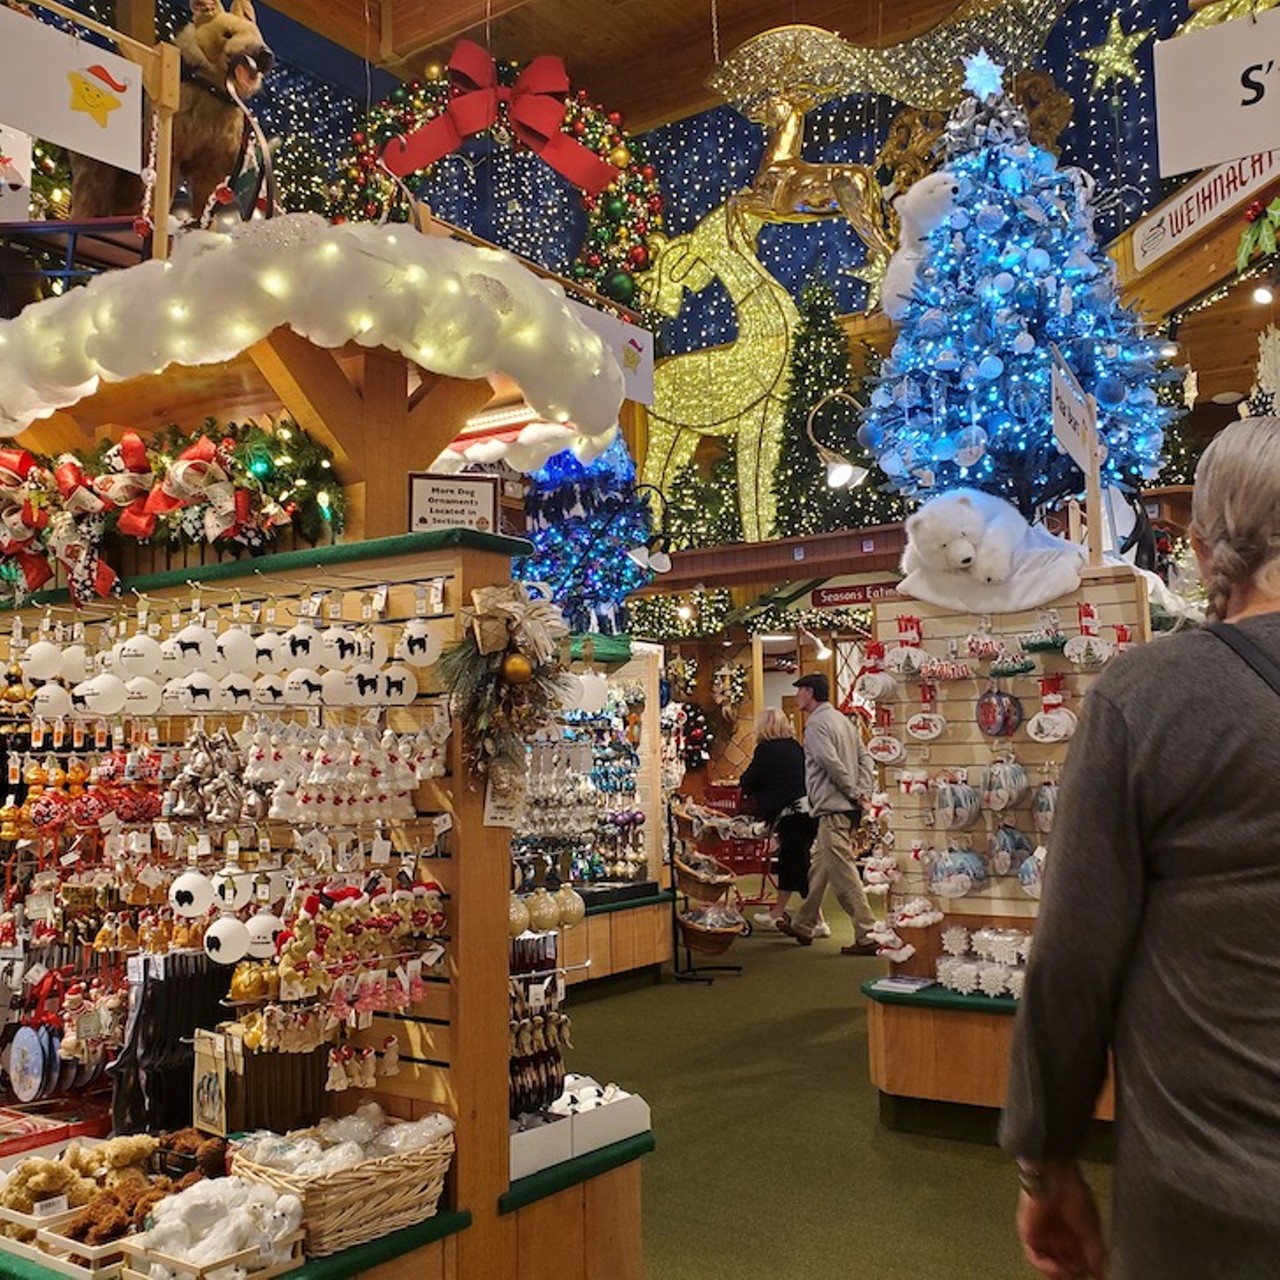 Visit the world's largest Christmas store
When it comes to Christmas in Michigan, Frankenmuth does it best. It helps when one of the largest Christmas-themed stores just so happens to be located there. At Bronner's CHRISTmas Wonderland, it's Christmas all year round.